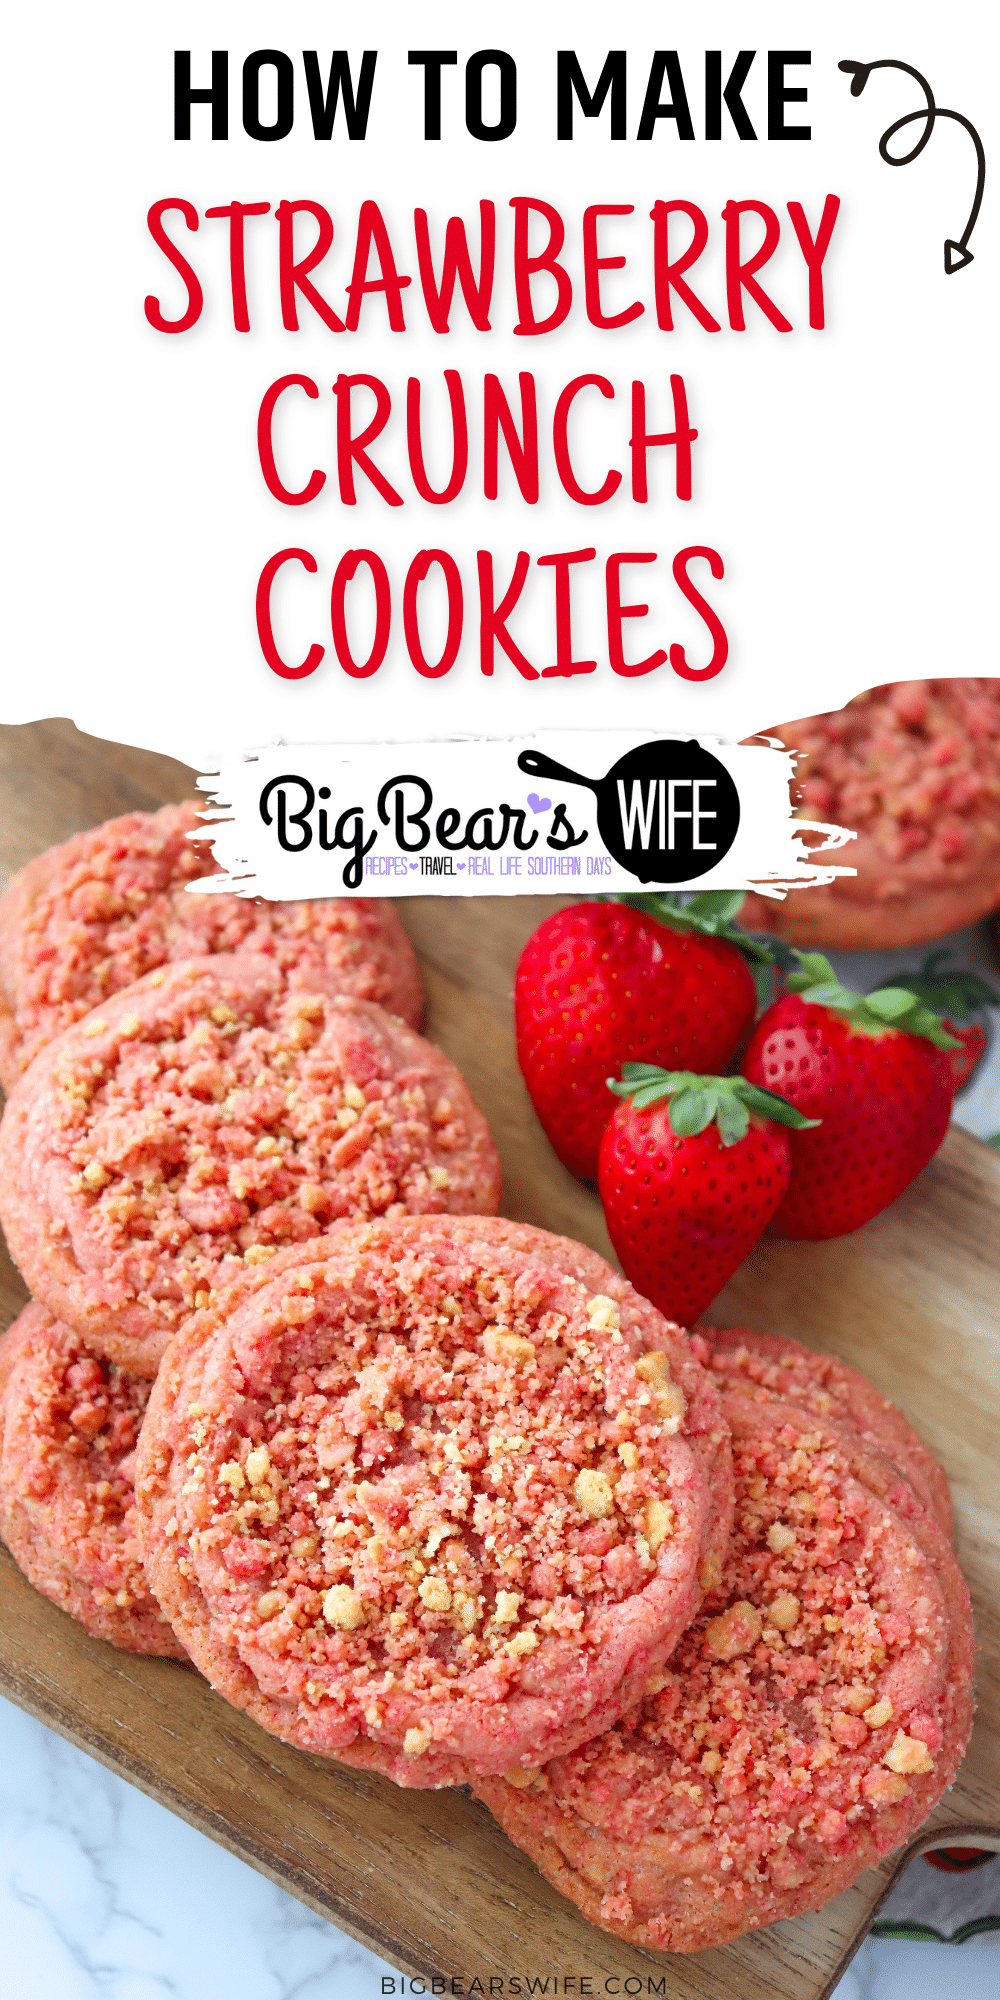 These homemade Strawberry Crunch Cookies are based off of the popular Strawberry Crunch Ice Cream bars and are loaded with strawberry flavor! They even have the iconic Strawberry Crunch topping on top!  via @bigbearswife